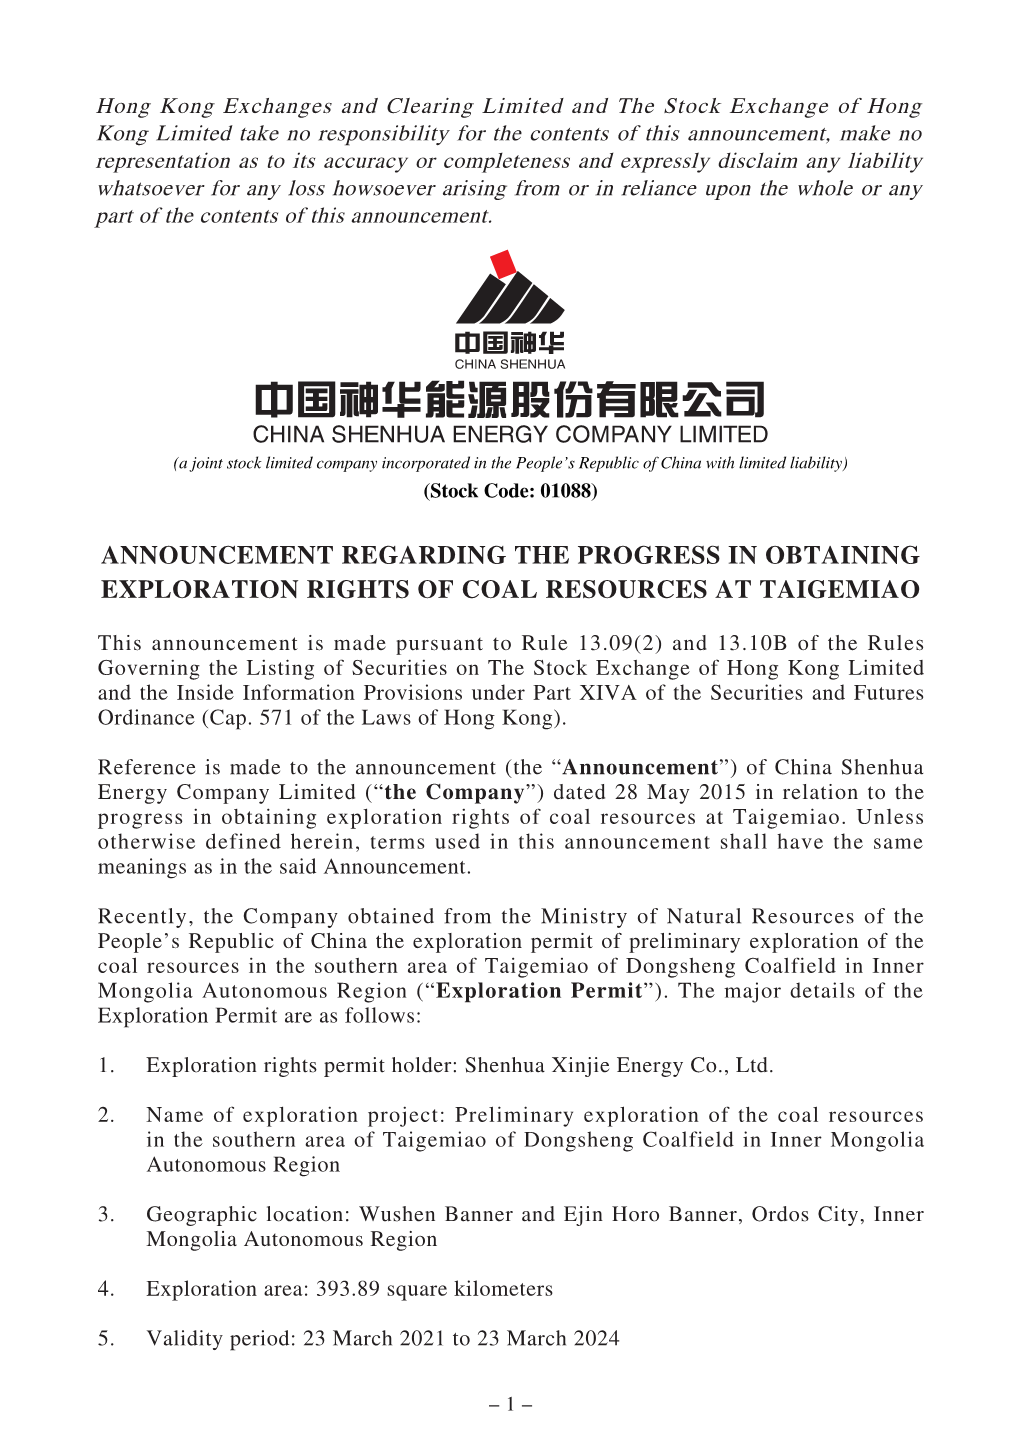 Announcement Regarding the Progress in Obtaining Exploration Rights of Coal Resources at Taigemiao